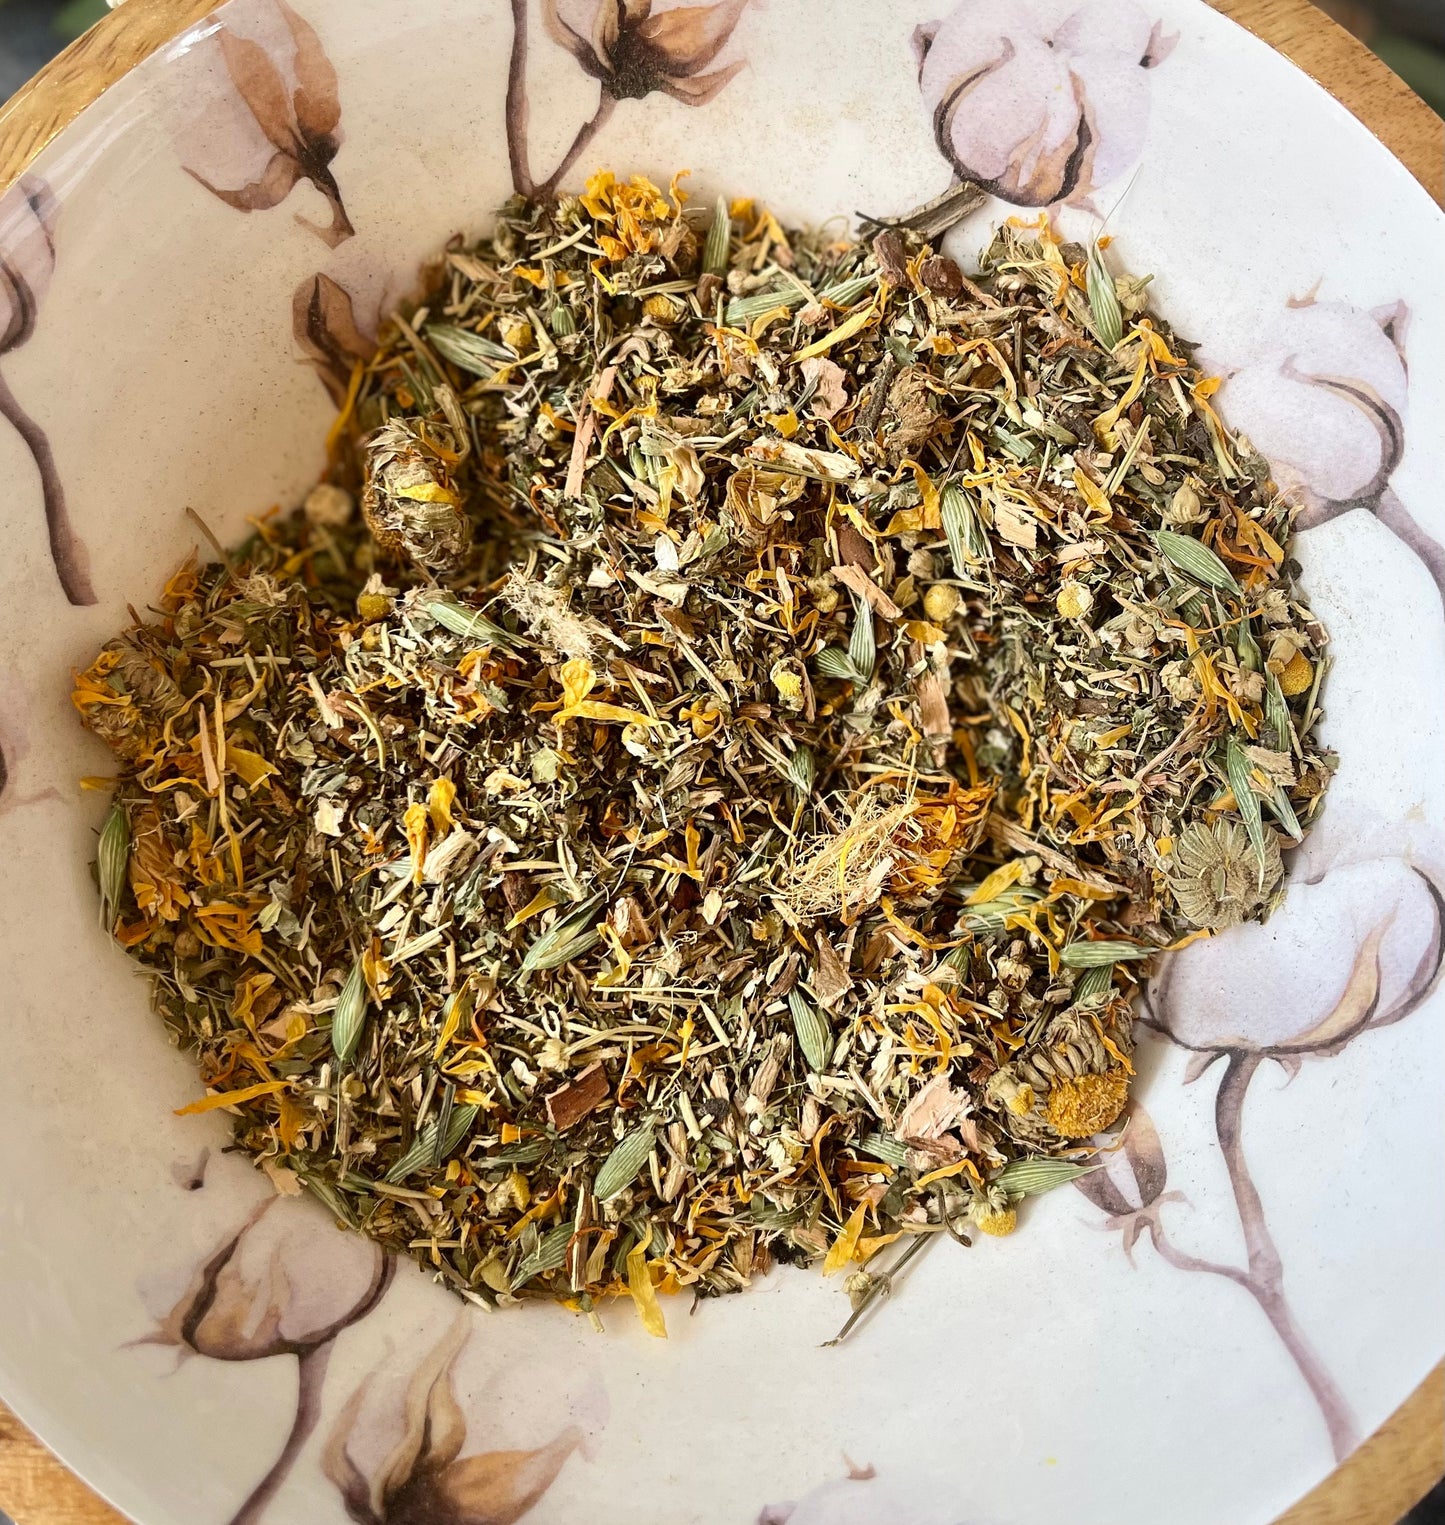 GI Support~Herbal Forage